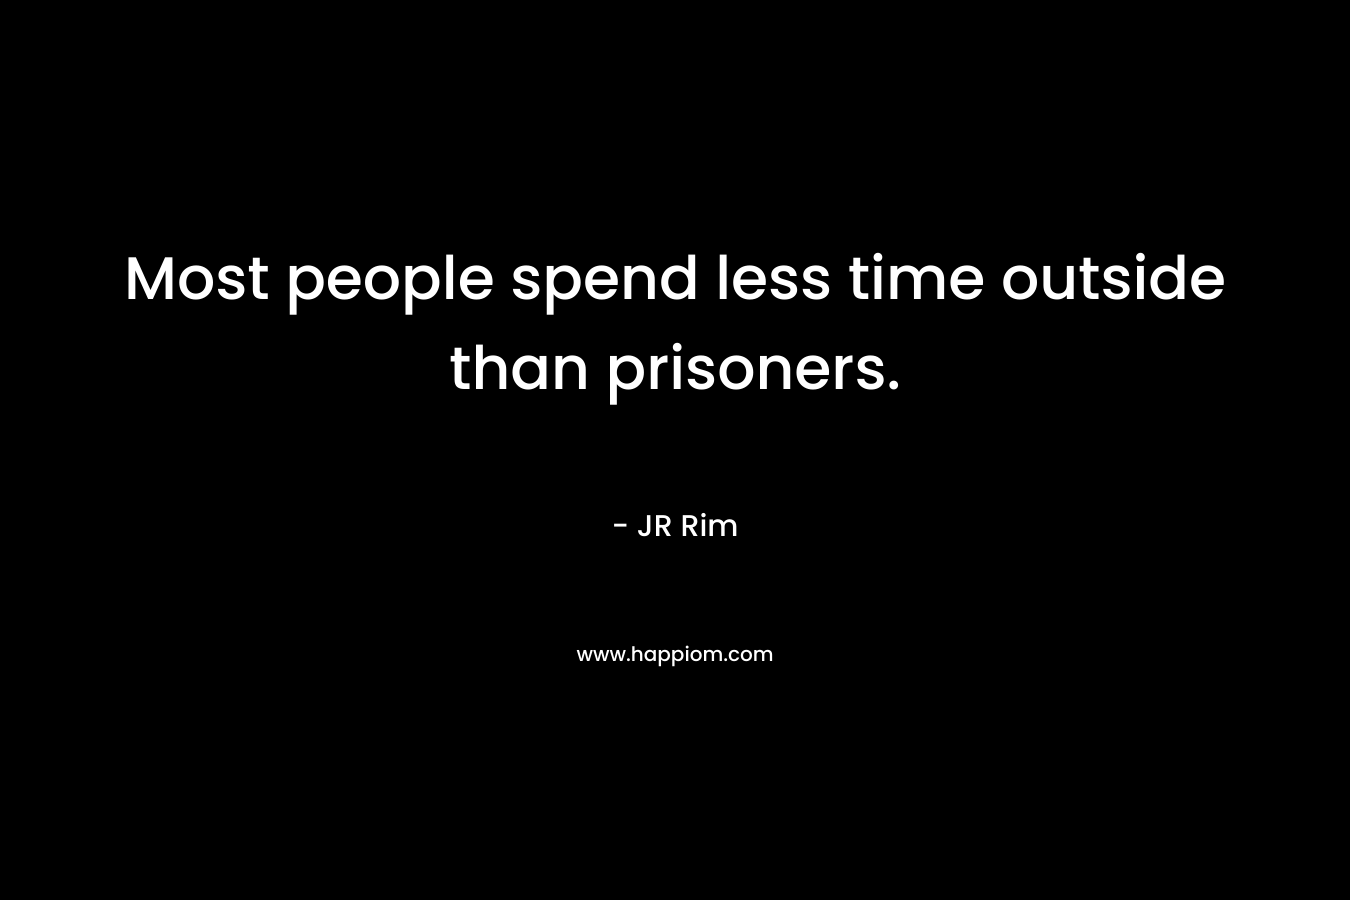 Most people spend less time outside than prisoners. – JR Rim